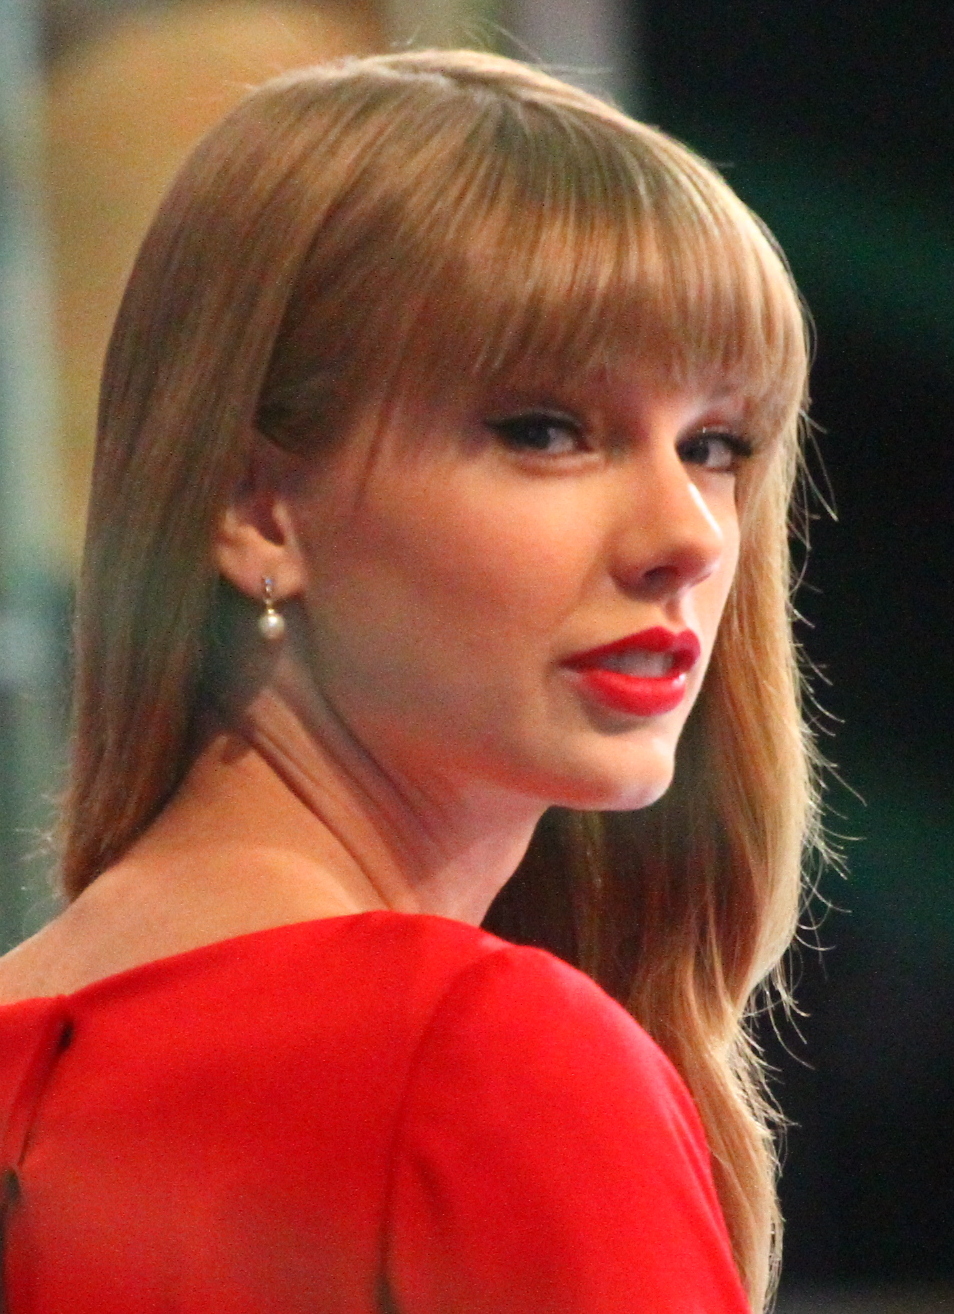 Taylor Swift surprises with extra tracks on 'Tortured Poets Department' album